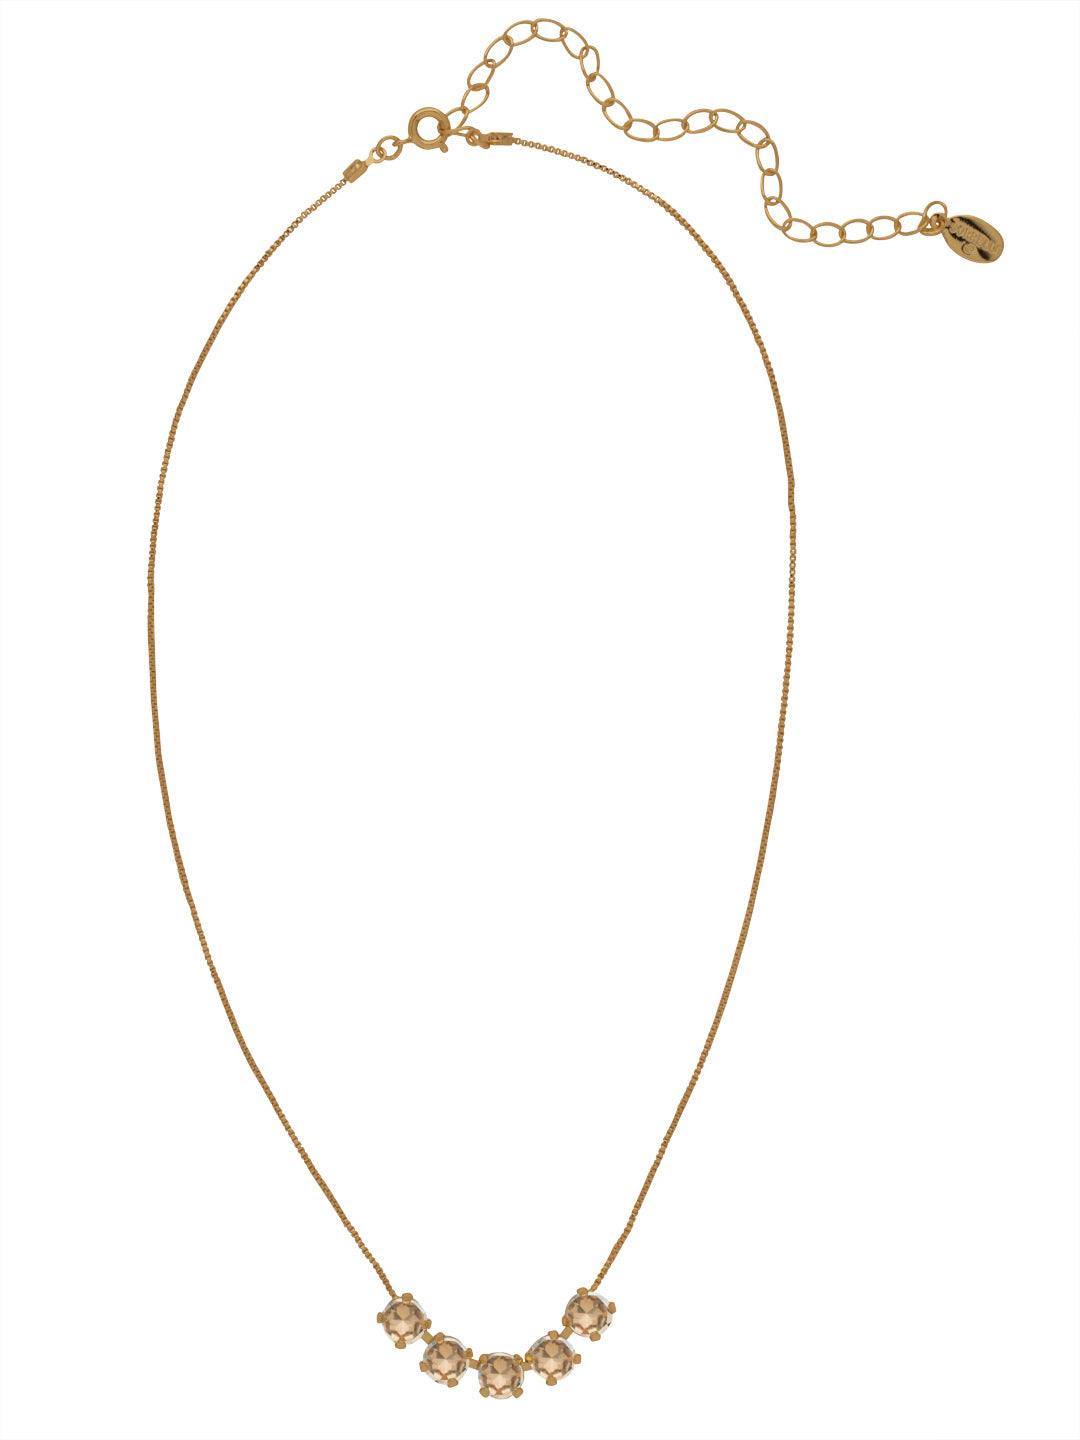 Shaughna Tennis Necklace - NFC84AGDCH - <p>The Shaughna Tennis Necklace features five crystals on a delicate adjustable chain. From Sorrelli's Dark Champagne collection in our Antique Gold-tone finish.</p>